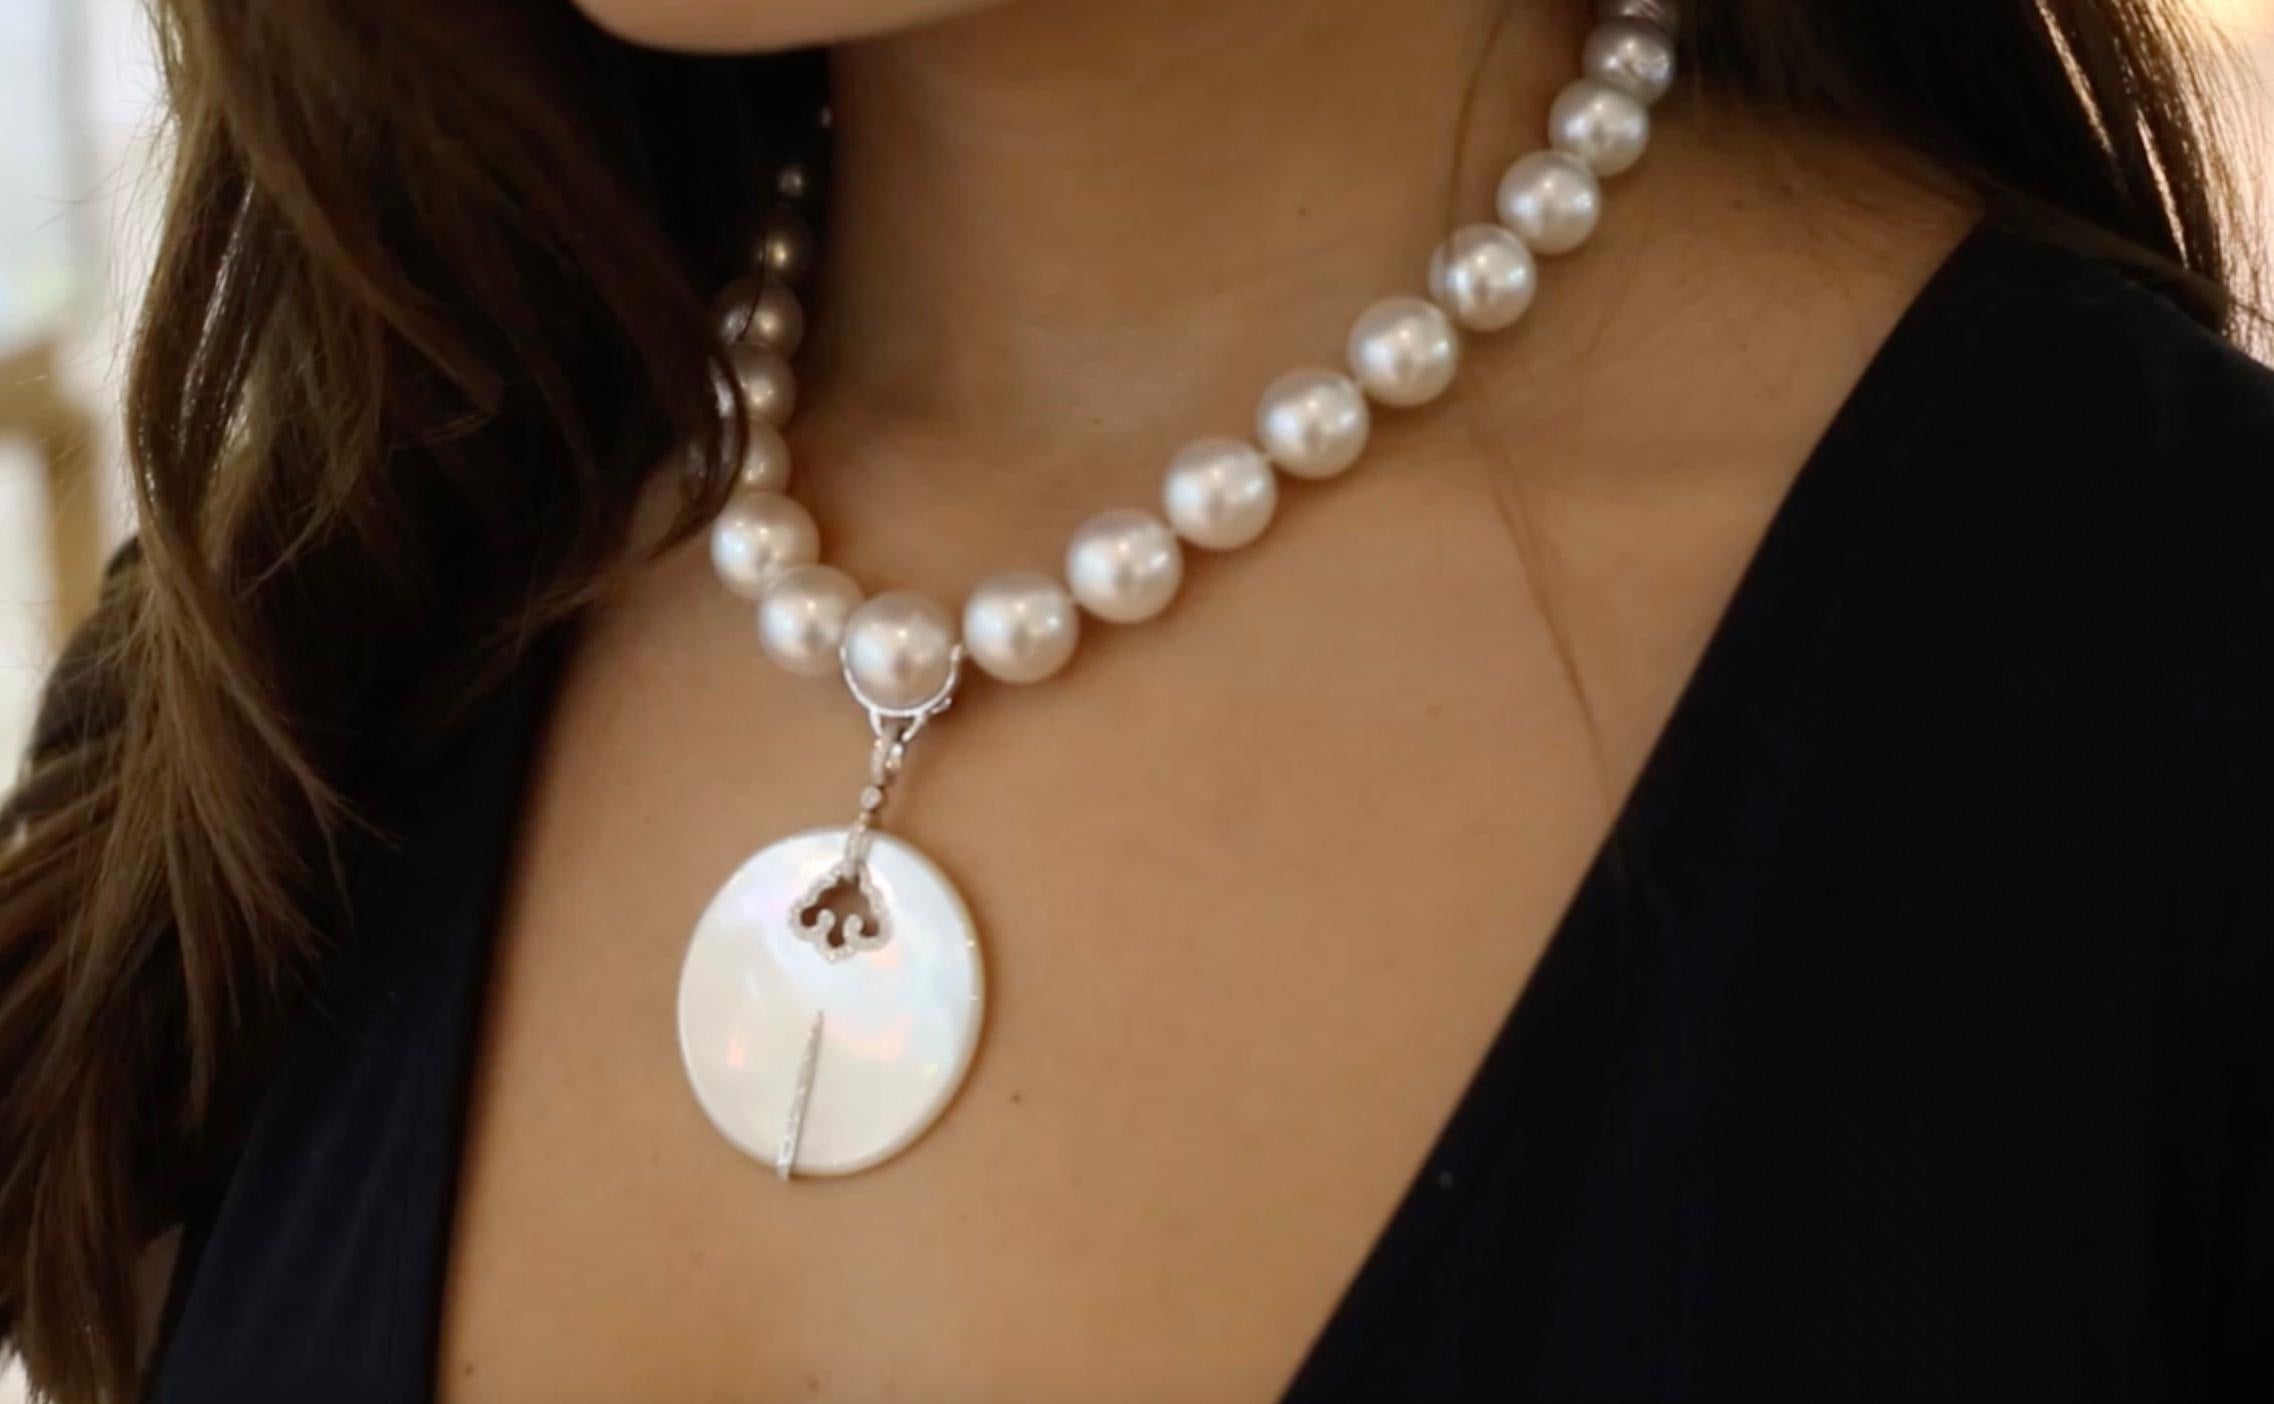 Superb and Smart Adler Mother of Pearl and Diamond on white gold Important Pendant of contemporary Art Deco design Asian inspiration. Removable bail. 
Hanging on a White culture Pearl Necklace with a Diamond and White gold 18k sphere design